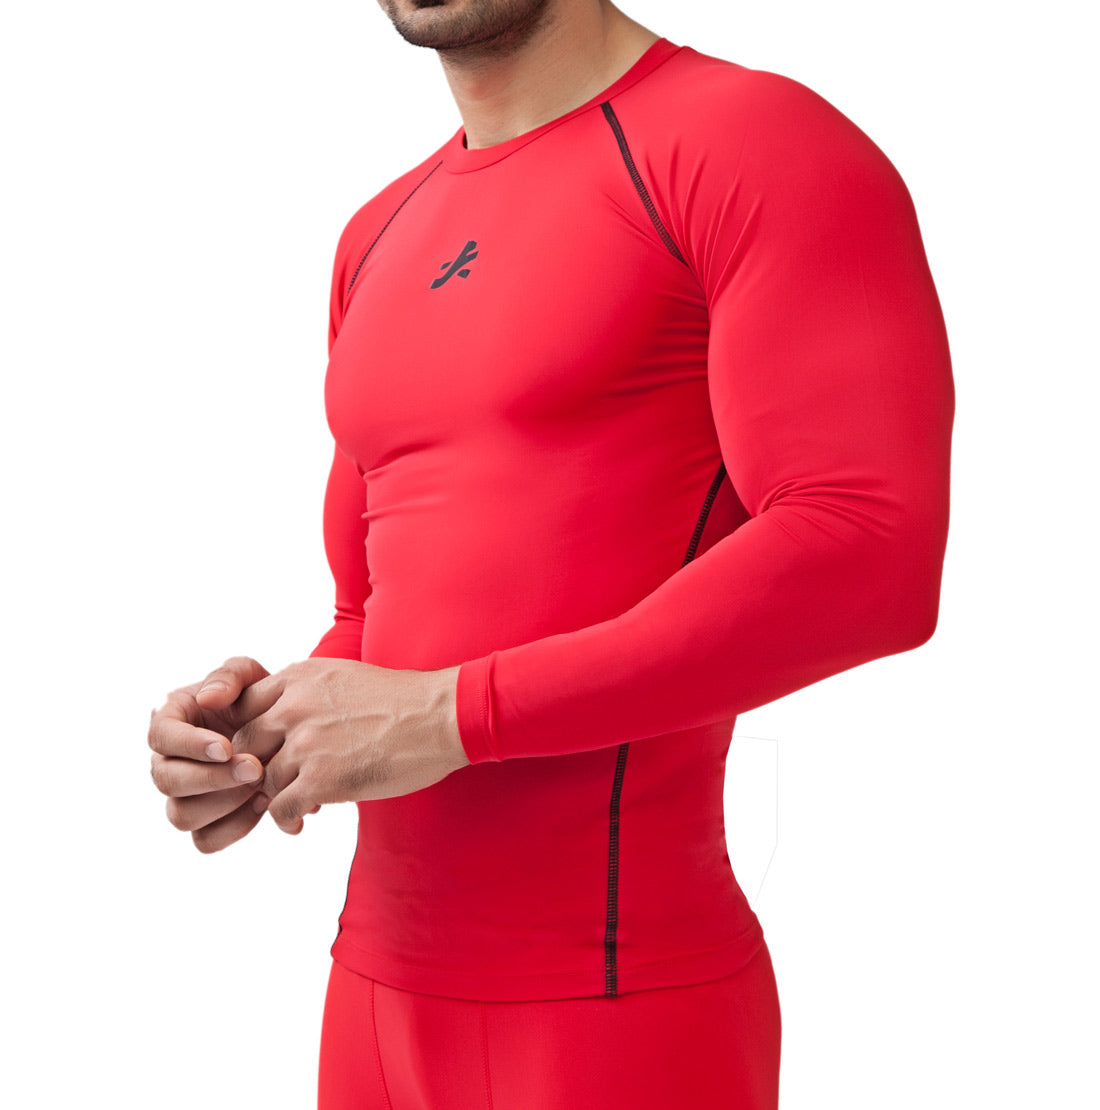  Under Armour Mens Armour HeatGear Compression Sleeveless  T-Shirt, Red